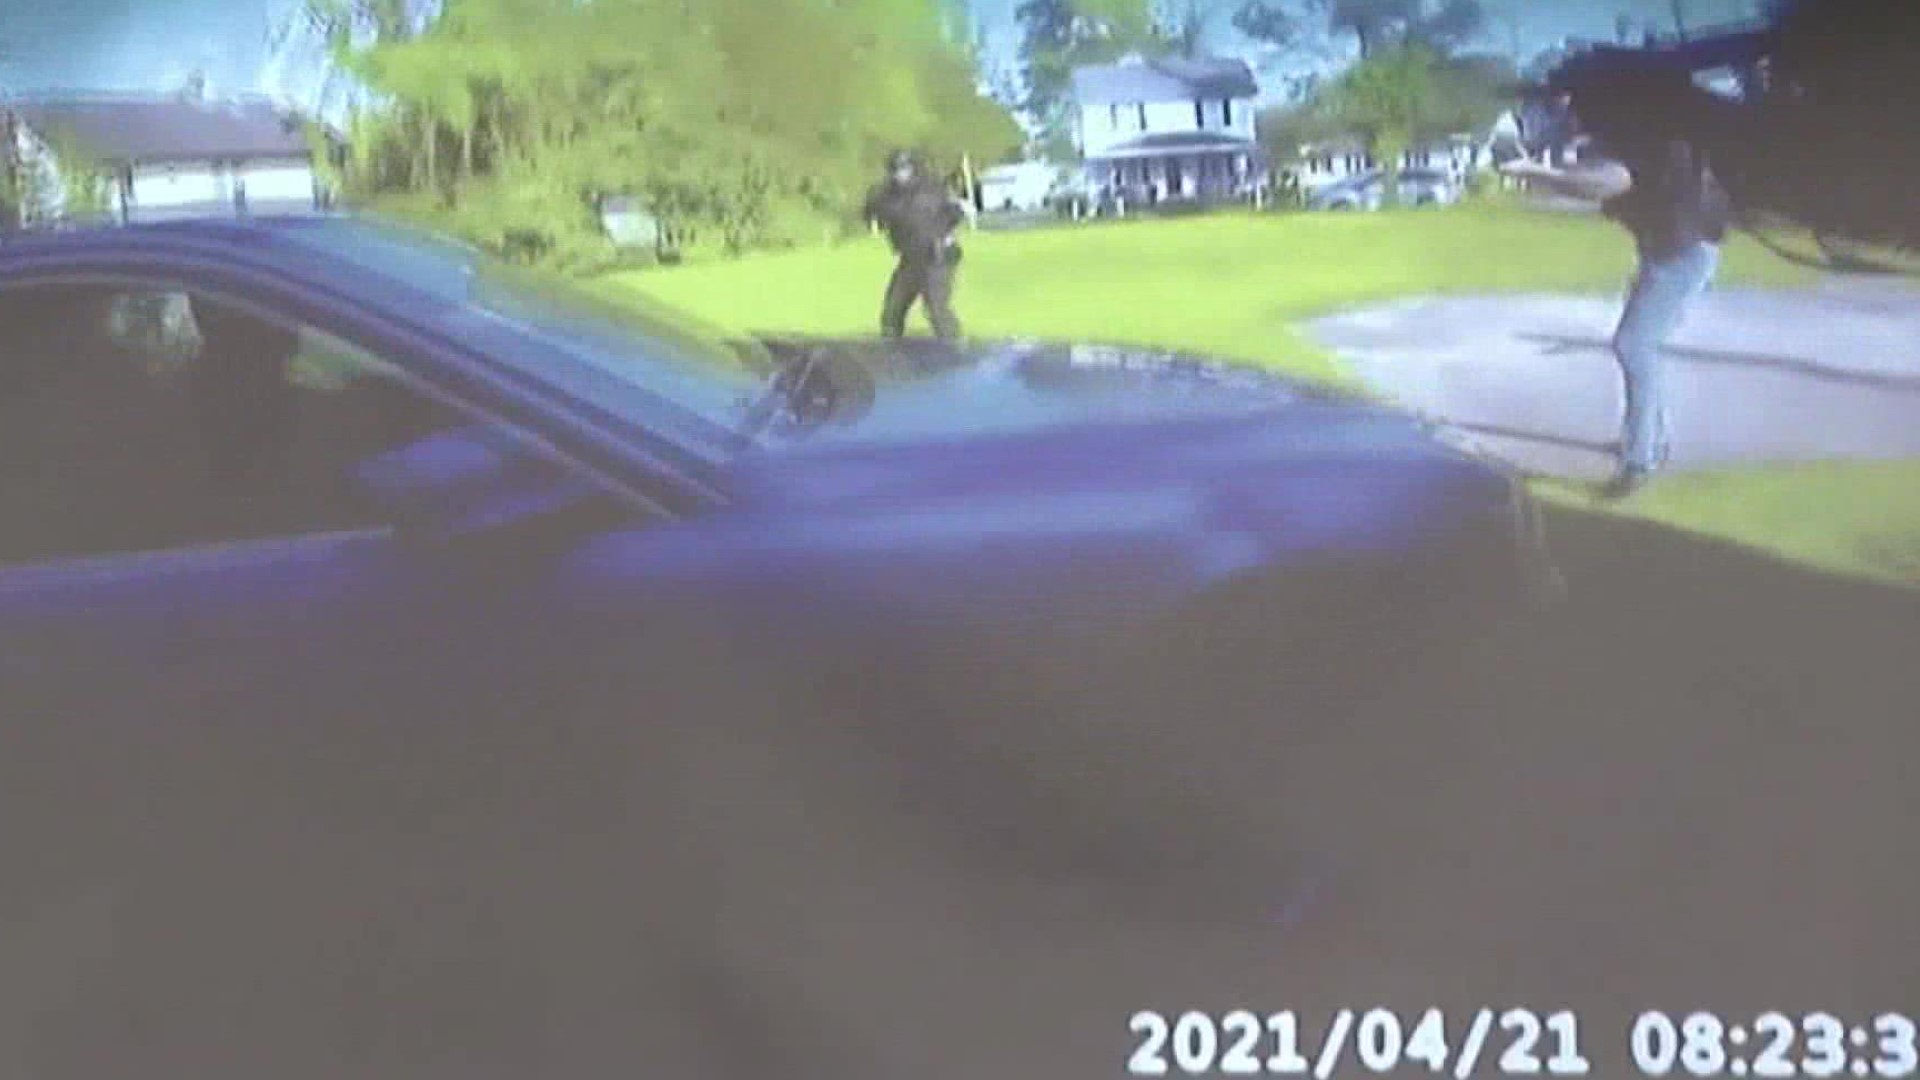 A North Carolina judge heard Pasquotank County Sheriff Tommy Wooten's request to release the body camera video of Andrew Brown's death to the public.